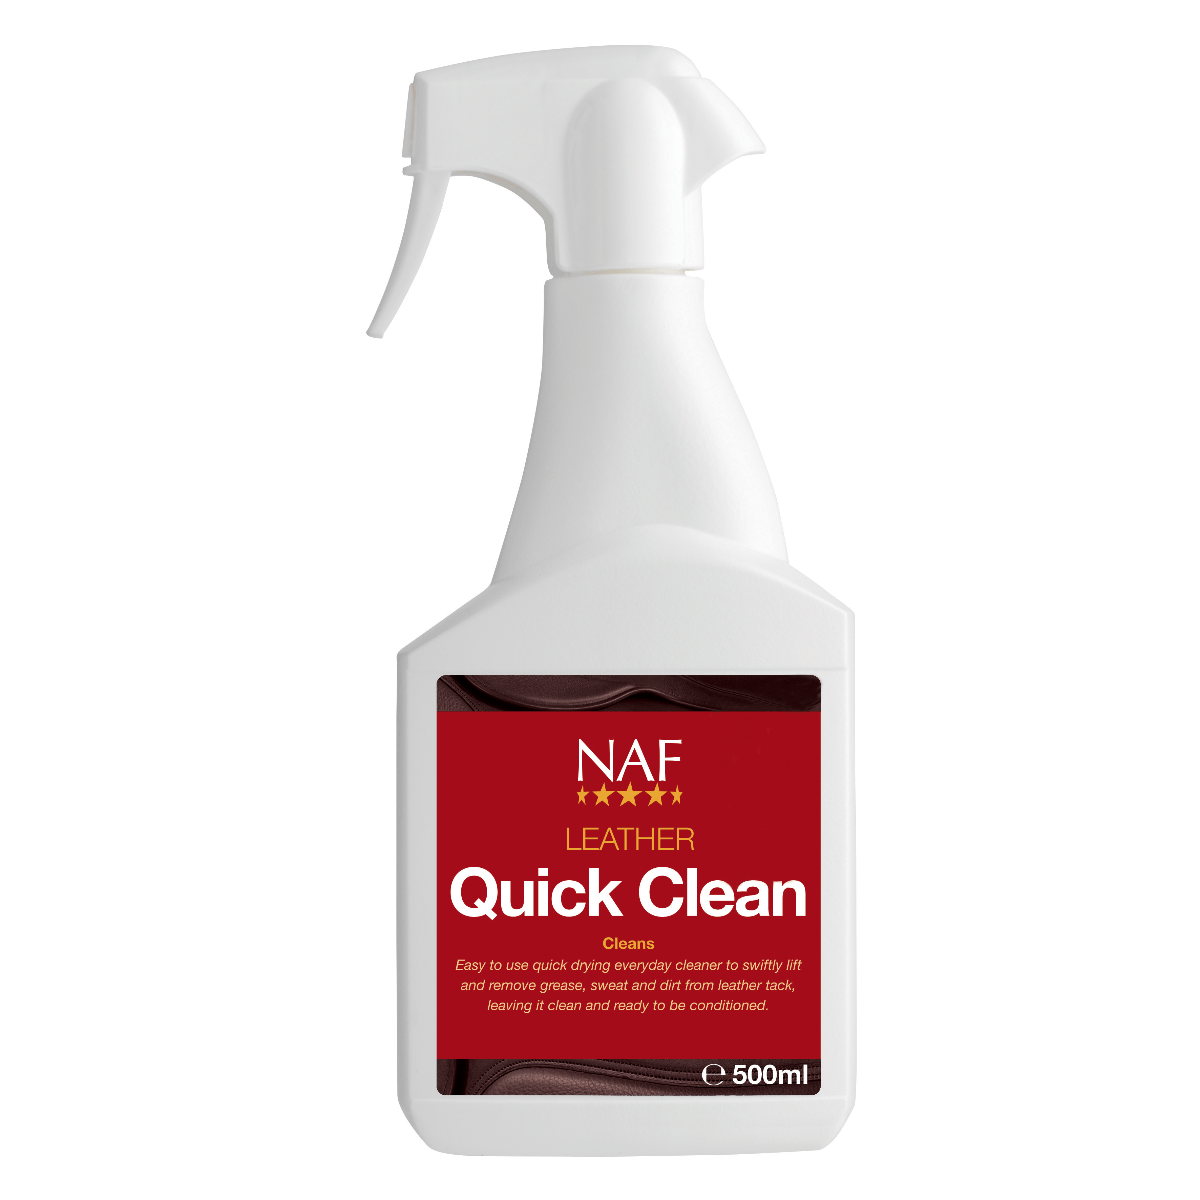 NAF Leather Quick Clean Spray